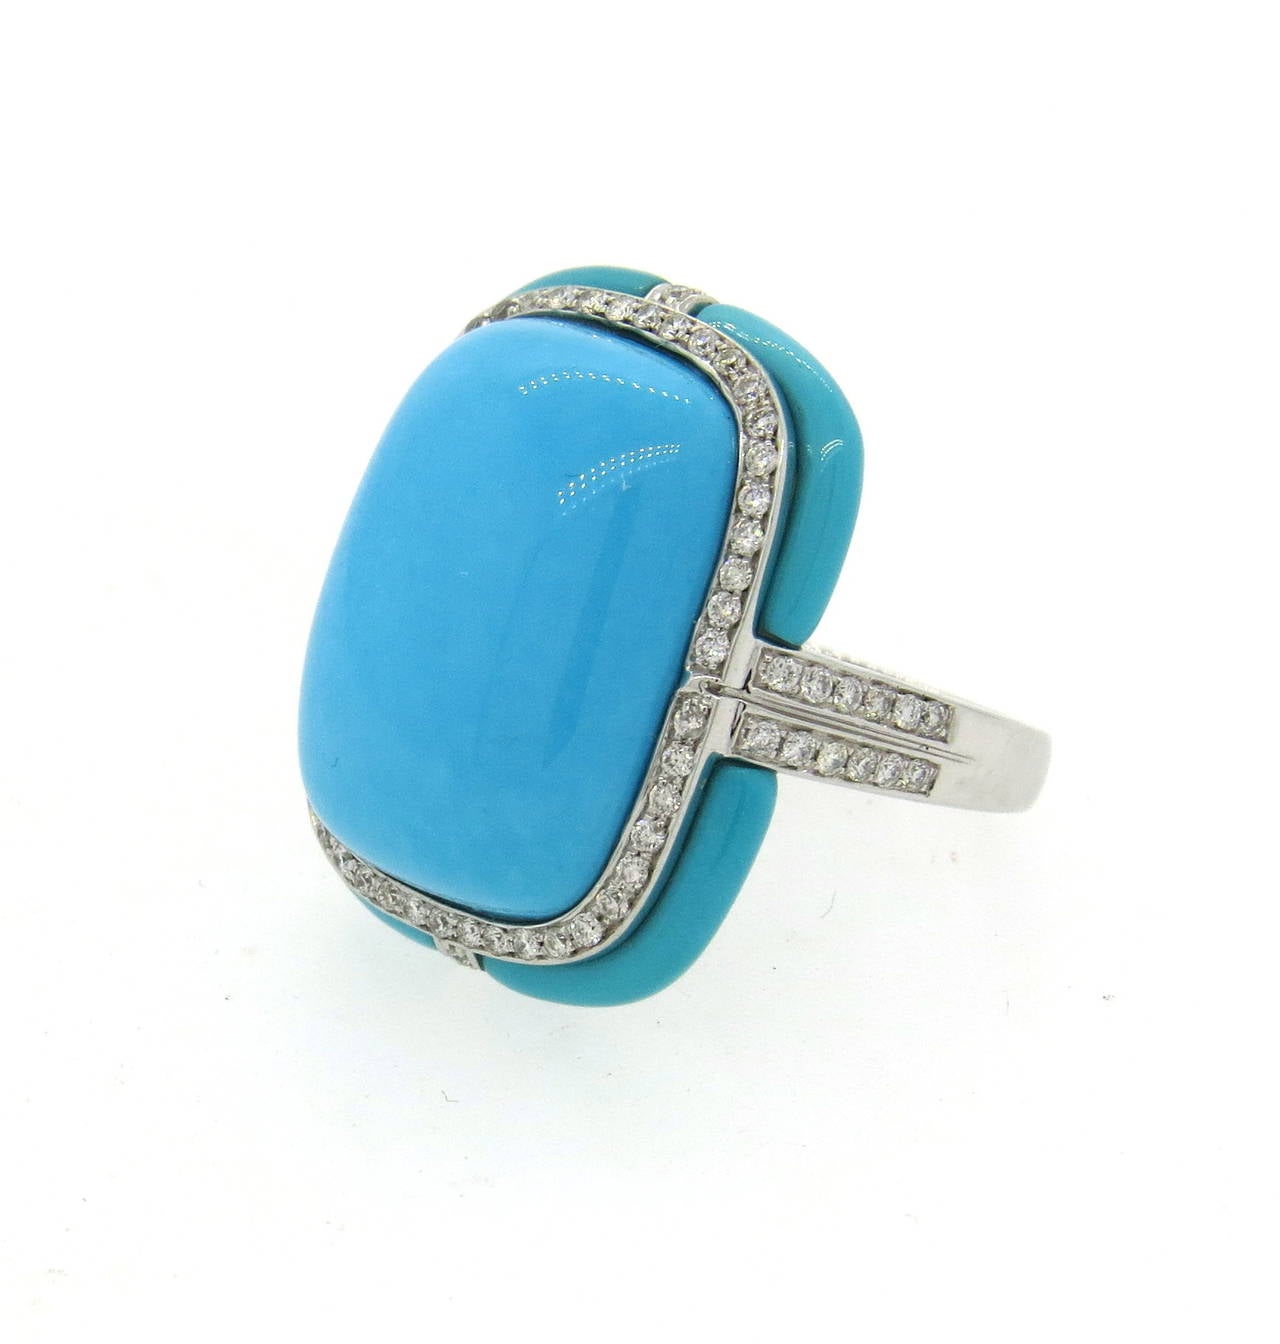 18k gold ring, featuring turquoise stones, surrounded with diamonds. Ring is a size 6 1/2, ring top is 24mm x 20mm. Weight - 11.8 grams